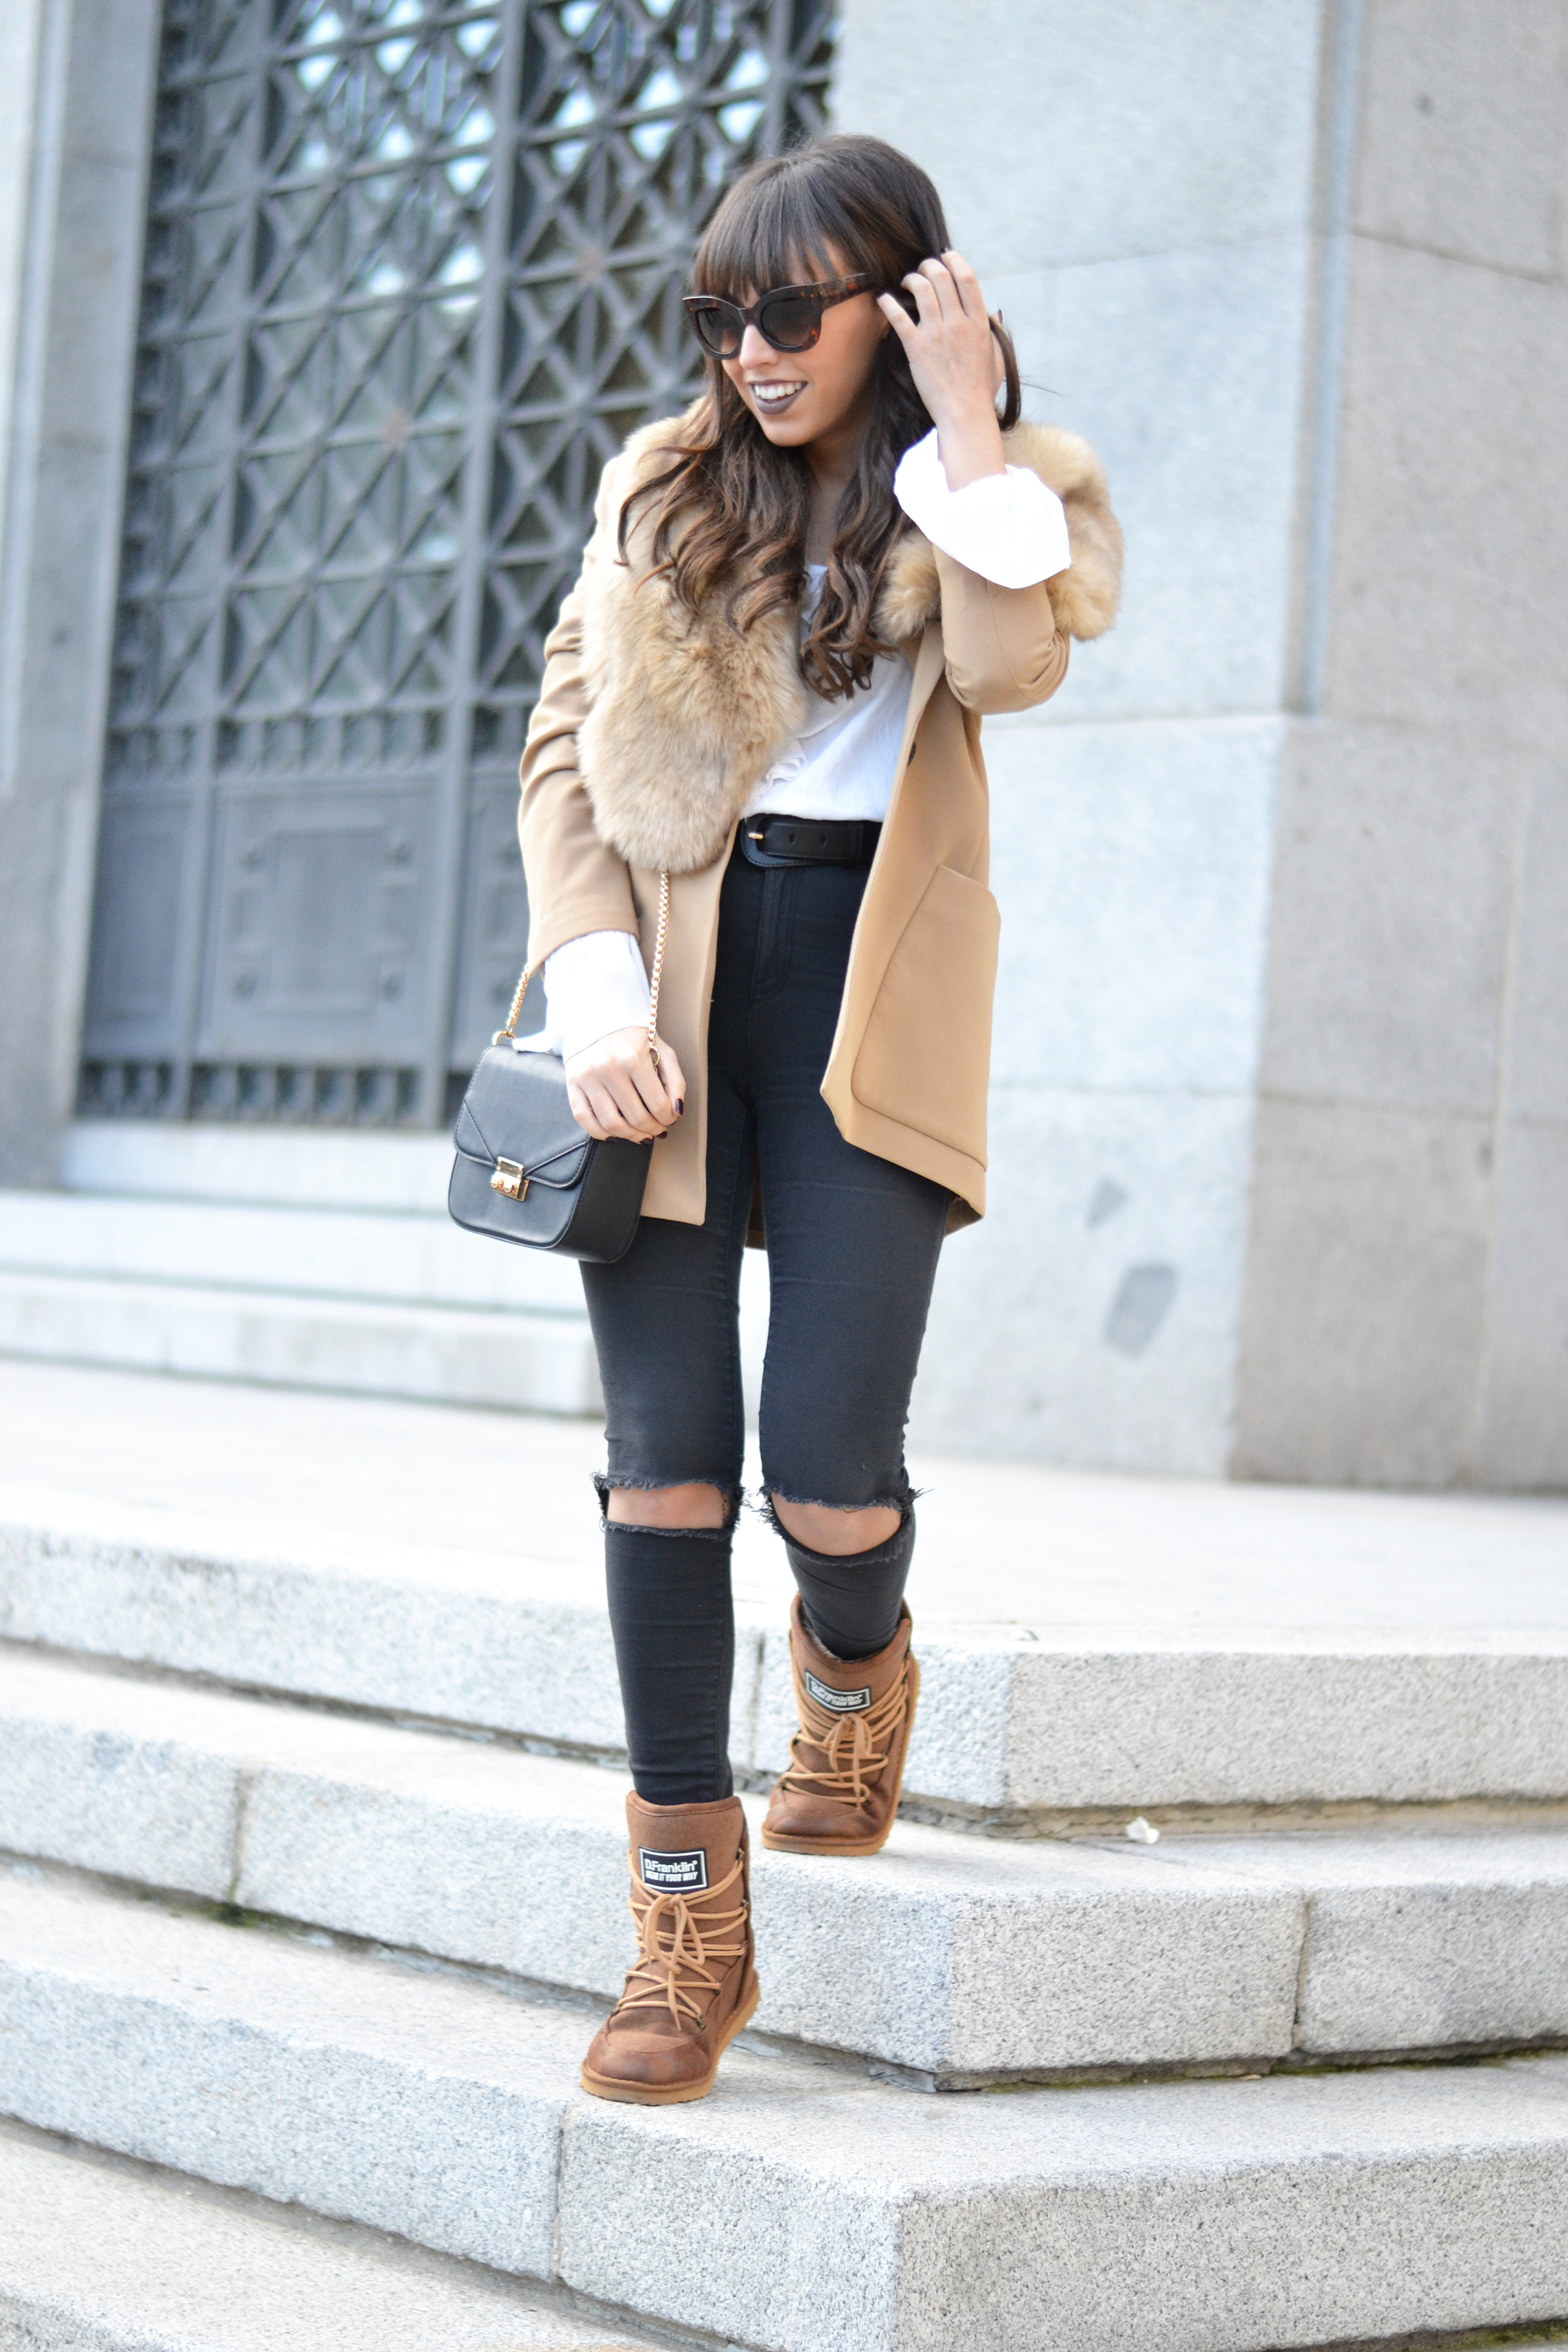 Snow boots outfit, apres ski boots, flared sleeves shirt, winter outfit, street style